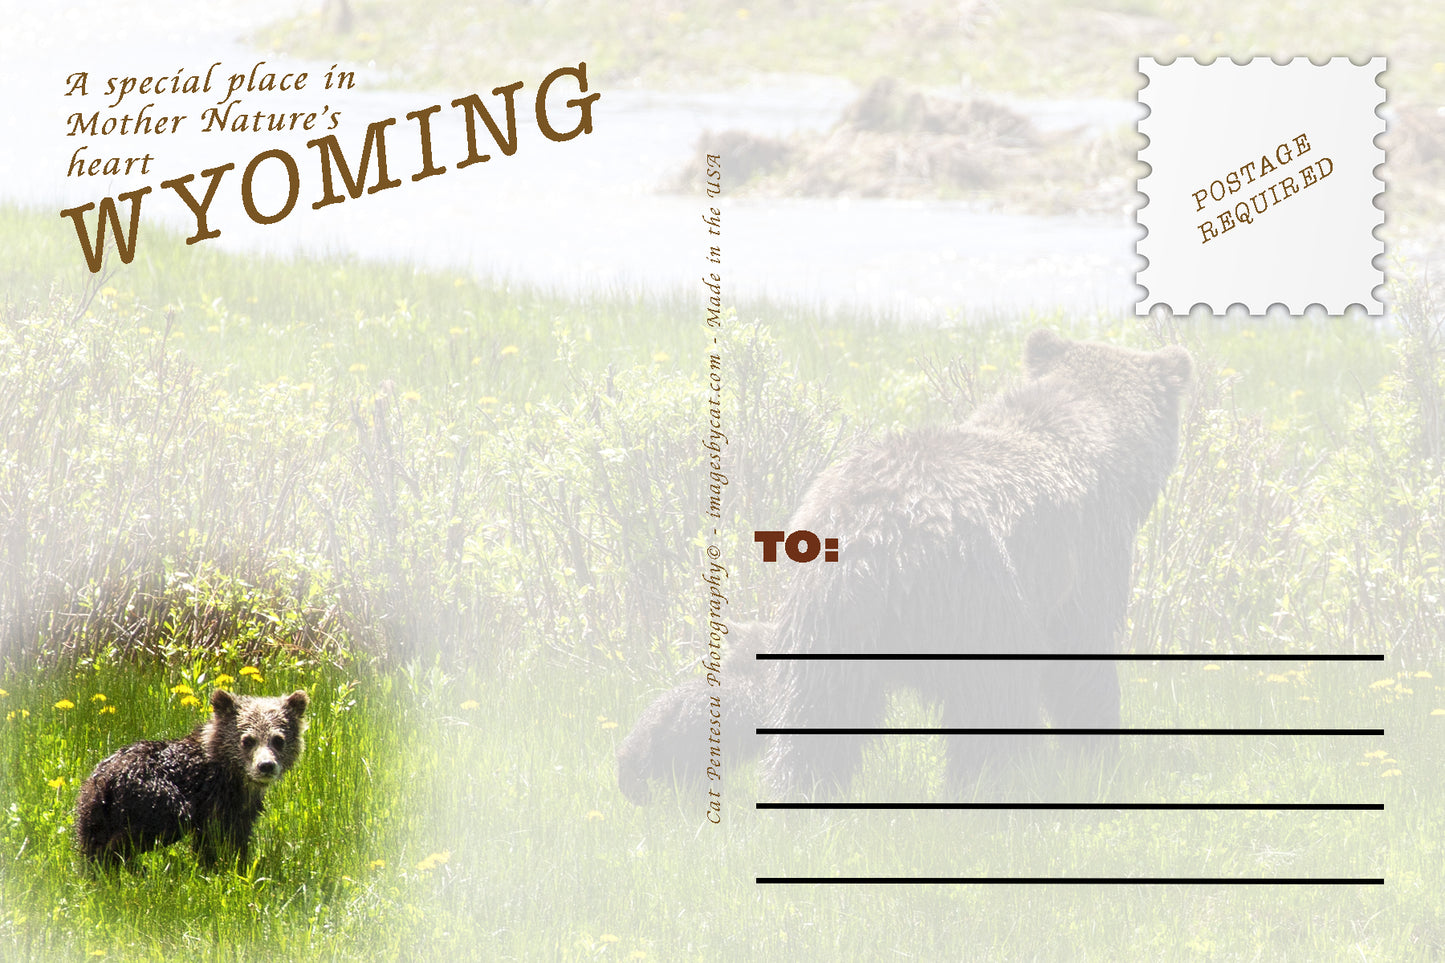 ADVICE FROM THE GRIZZLY POSTCARD